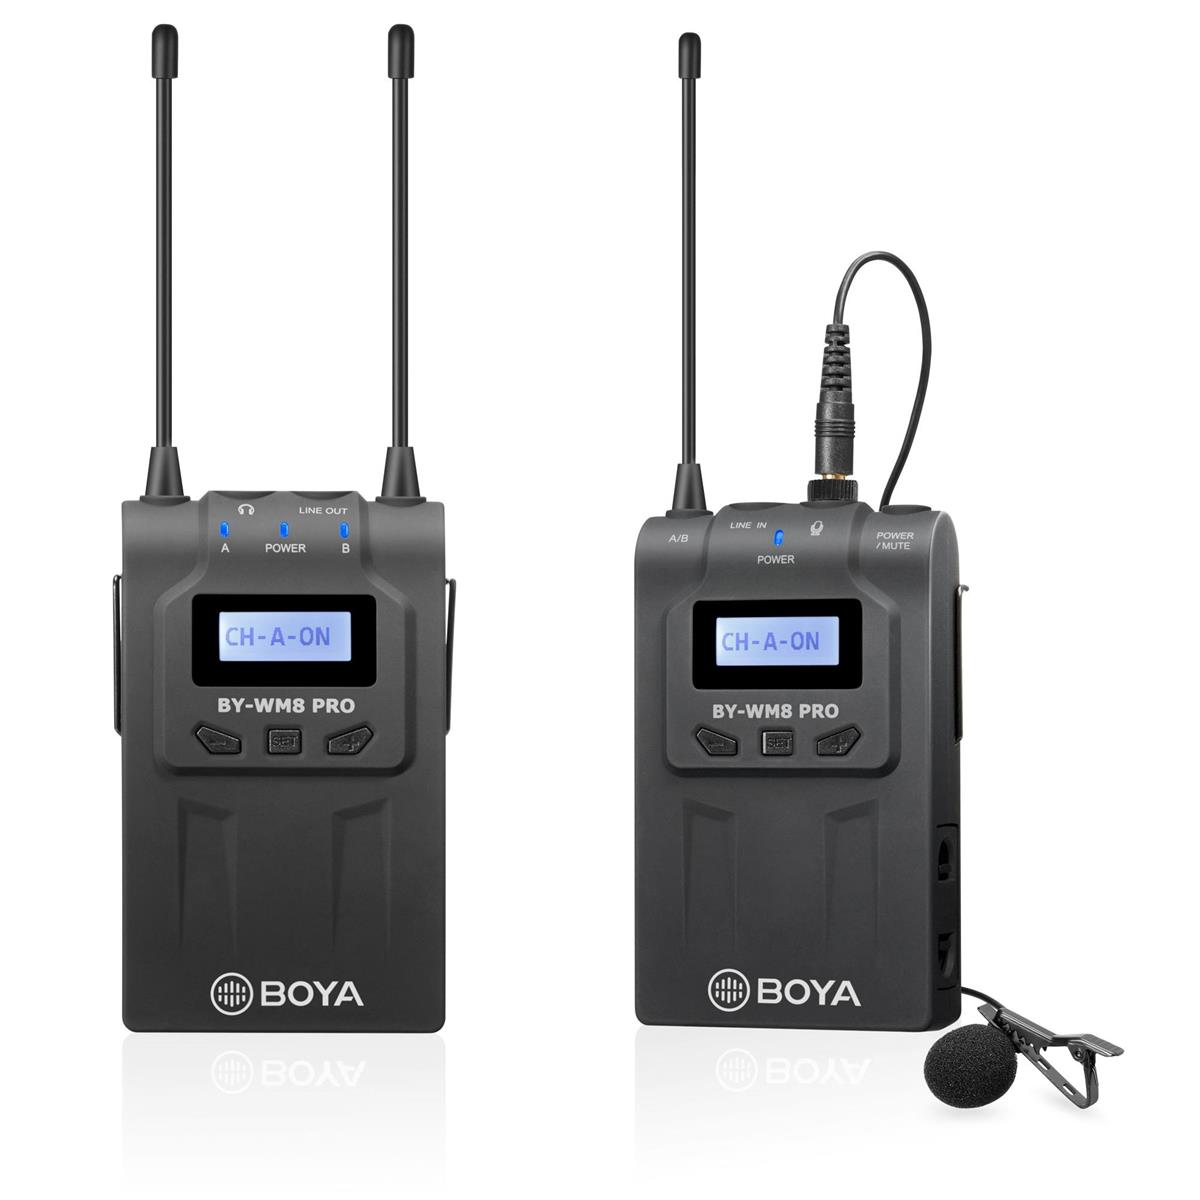 BOYA by-WM8 Pro-K1 UHF Dual-Channel Wire Wireless Microphone System with One Receiver and One Transmitter